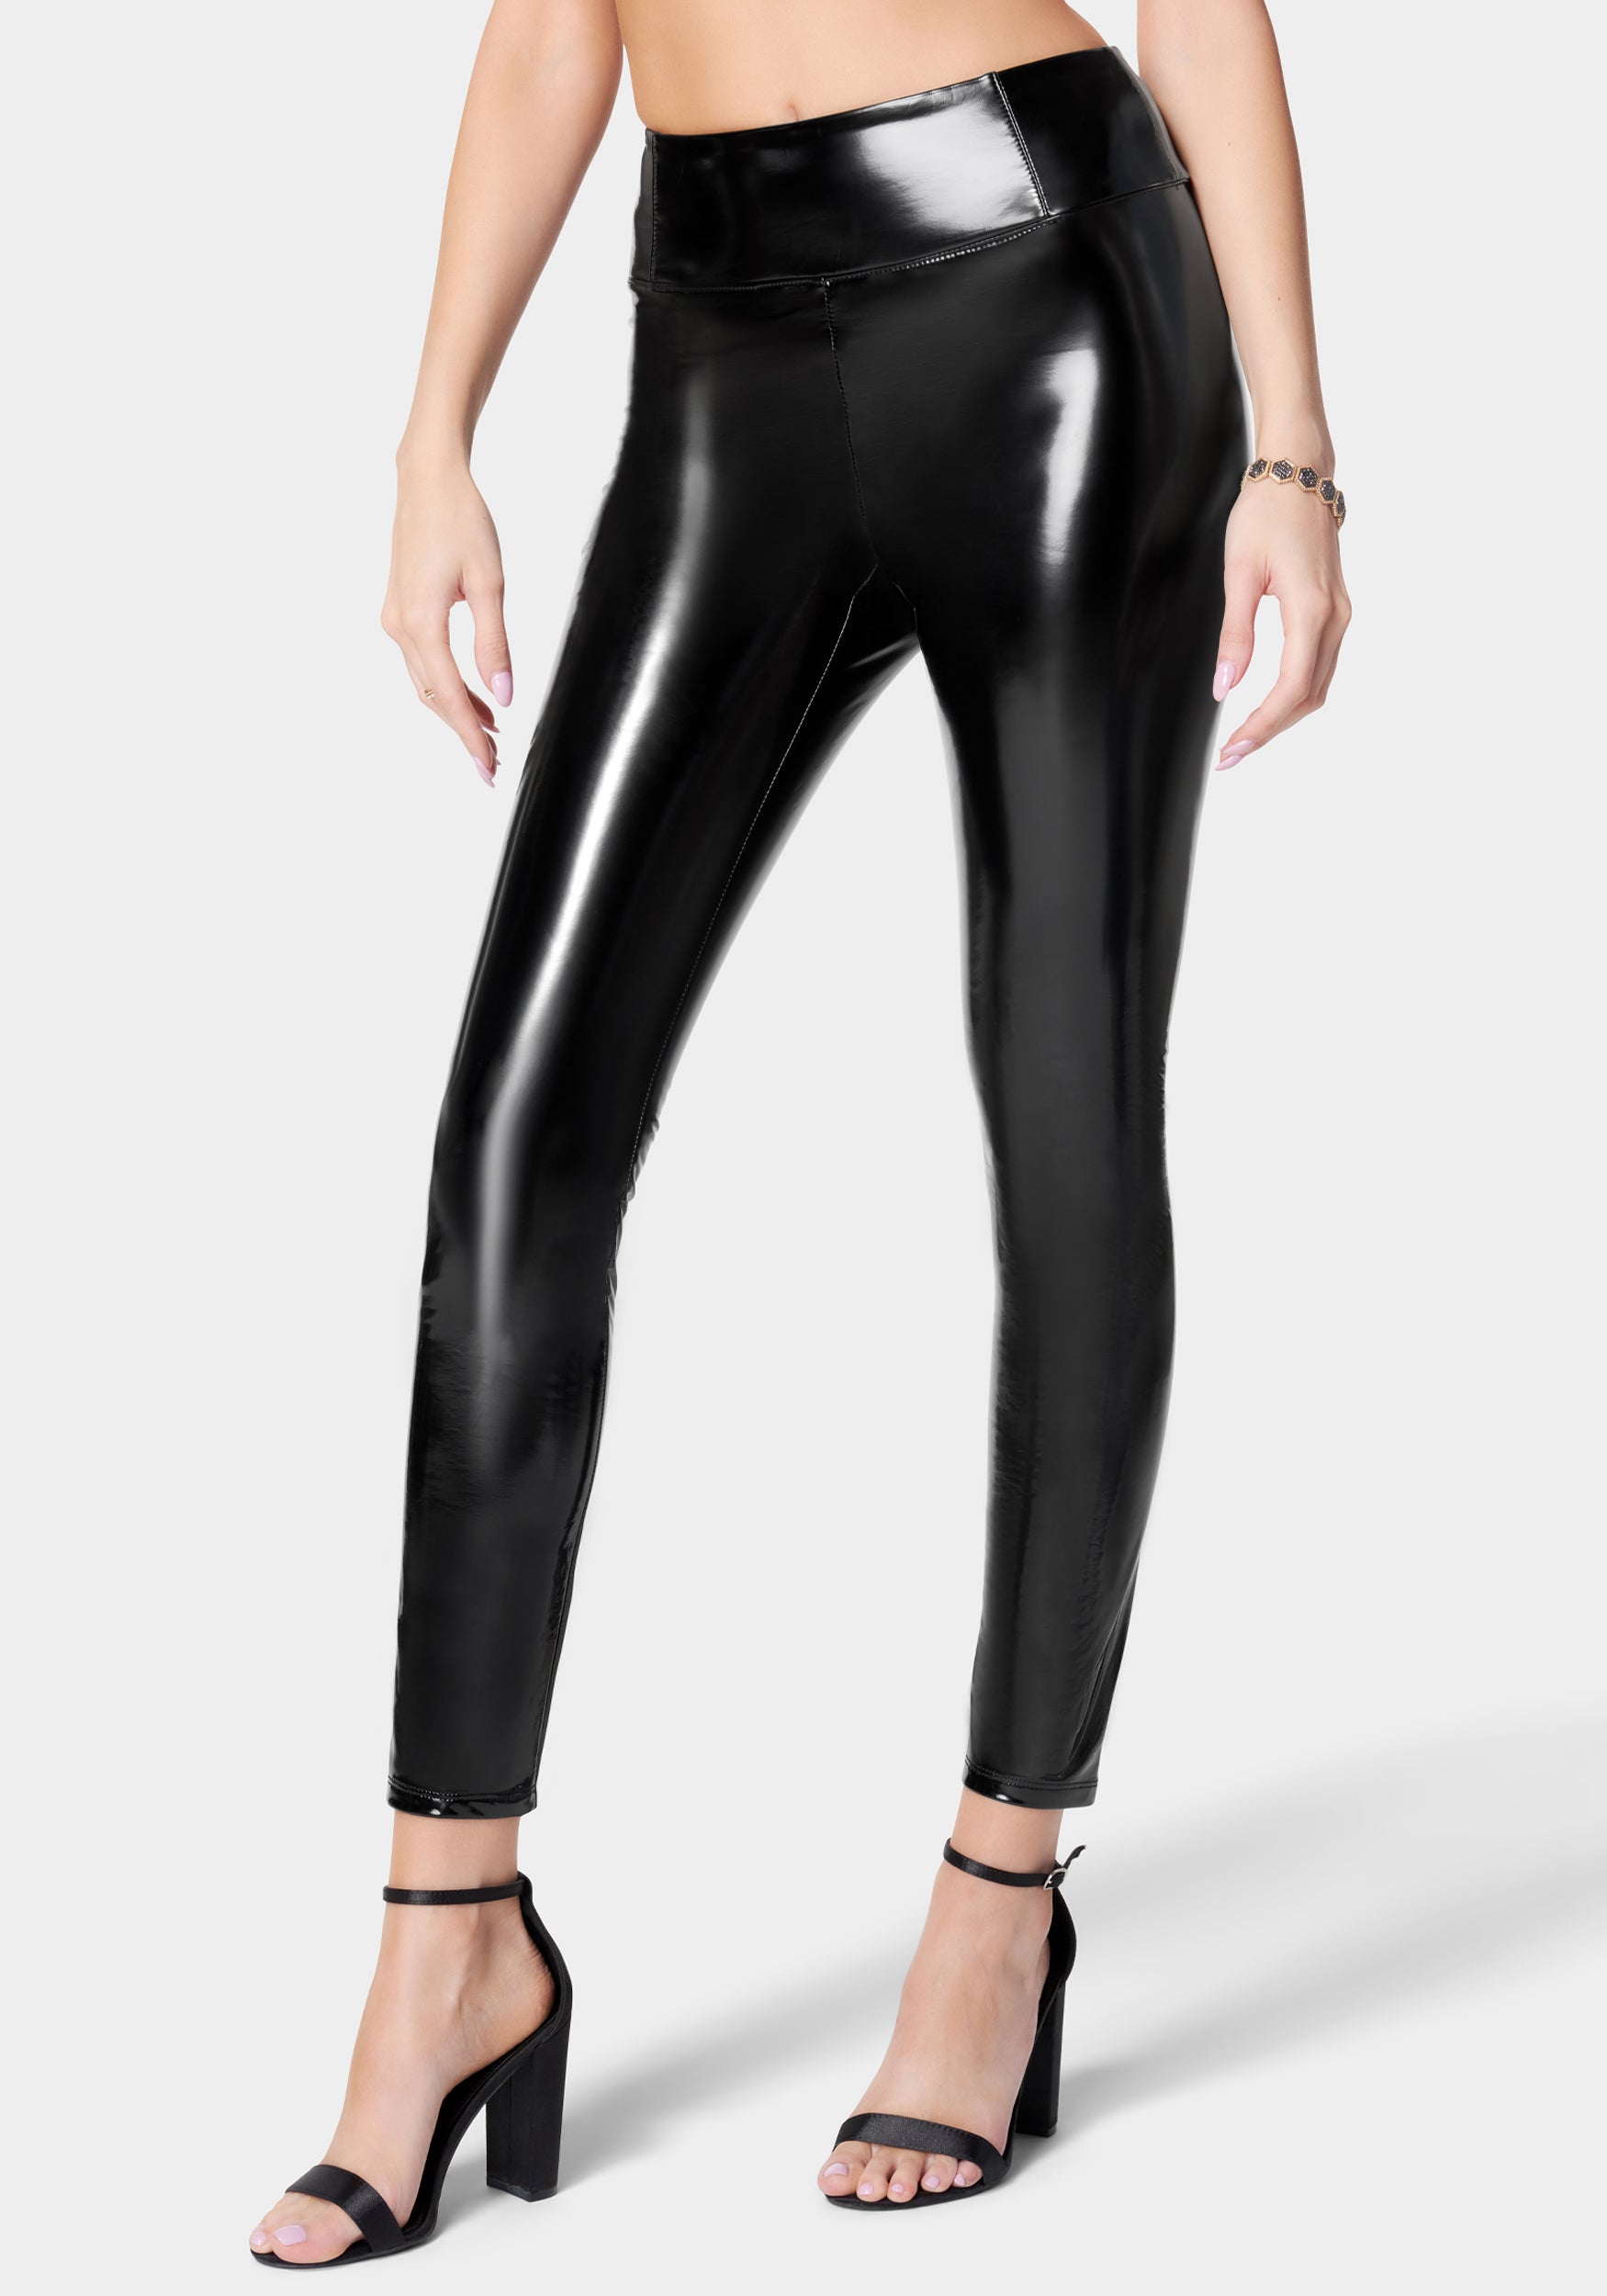 HMGYH satina high waisted leggings for women Zip Side Solid Tailored Pants  (Color : Black, Size : M) : Buy Online at Best Price in KSA - Souq is now  : Fashion